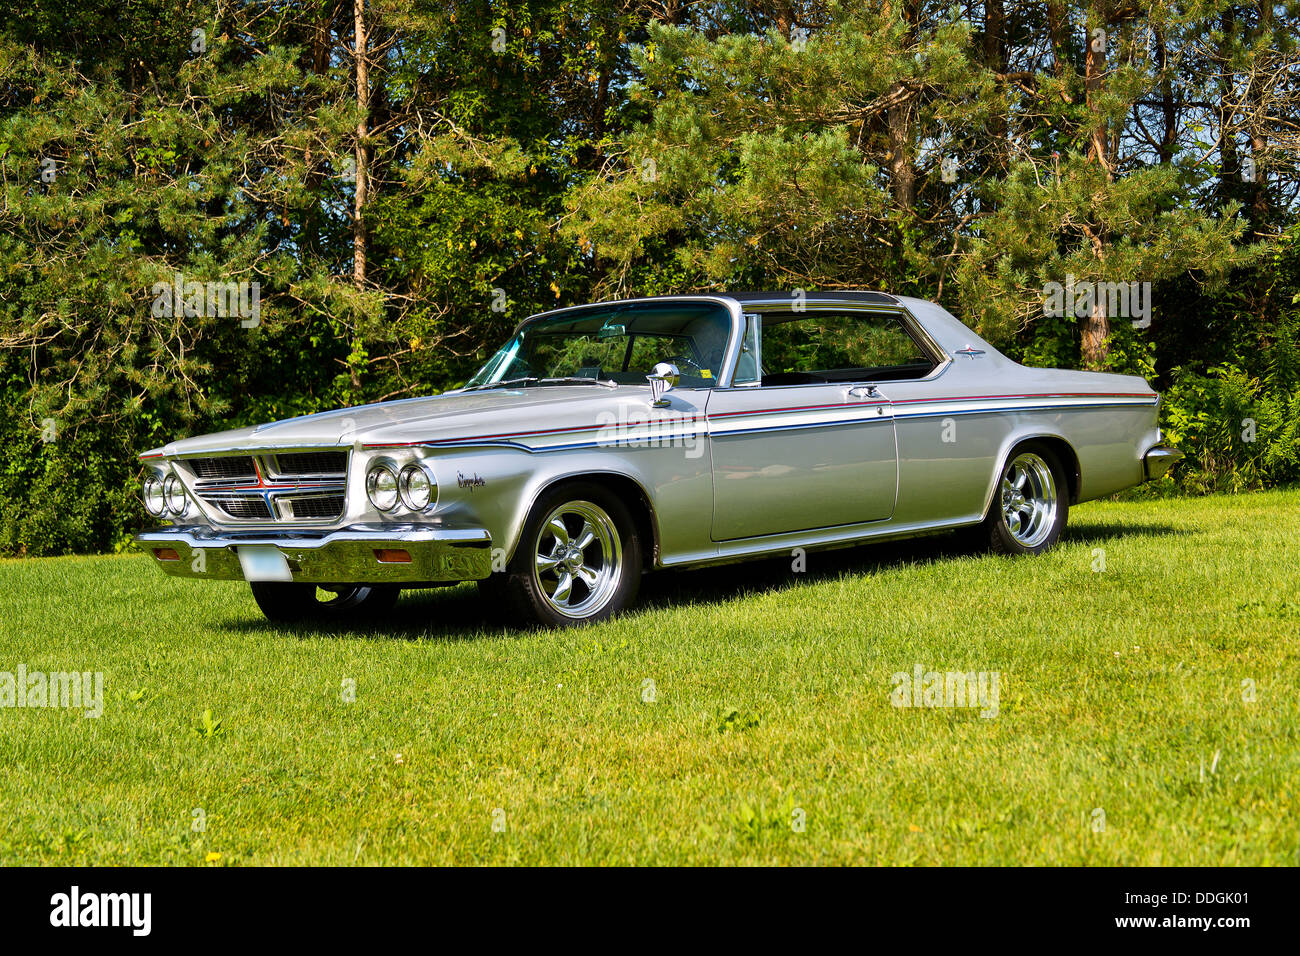 1964 Chrysler 300 Silver Edition Banque D'Images